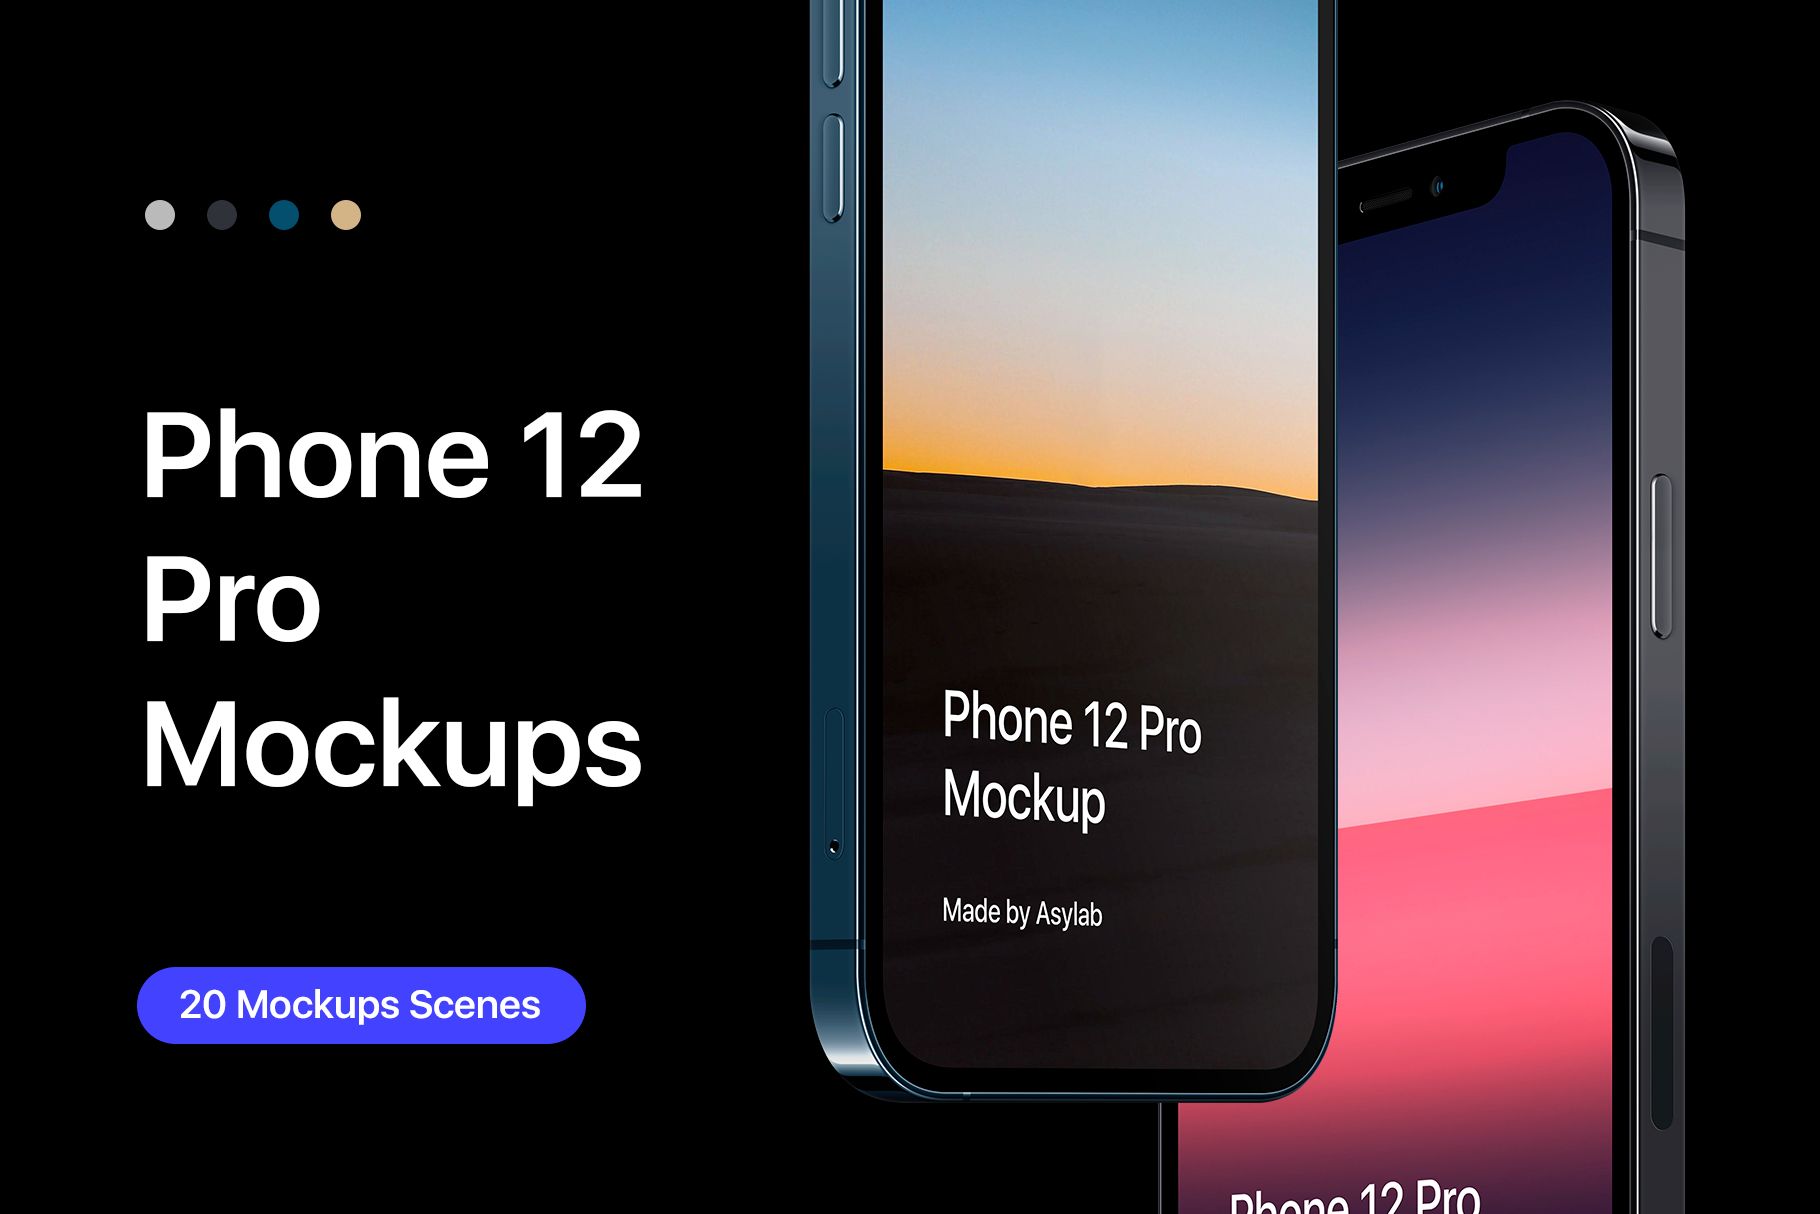 Phone 12 Pro - 20 Mockups Scenes, An Iphone Mockup By Asylab